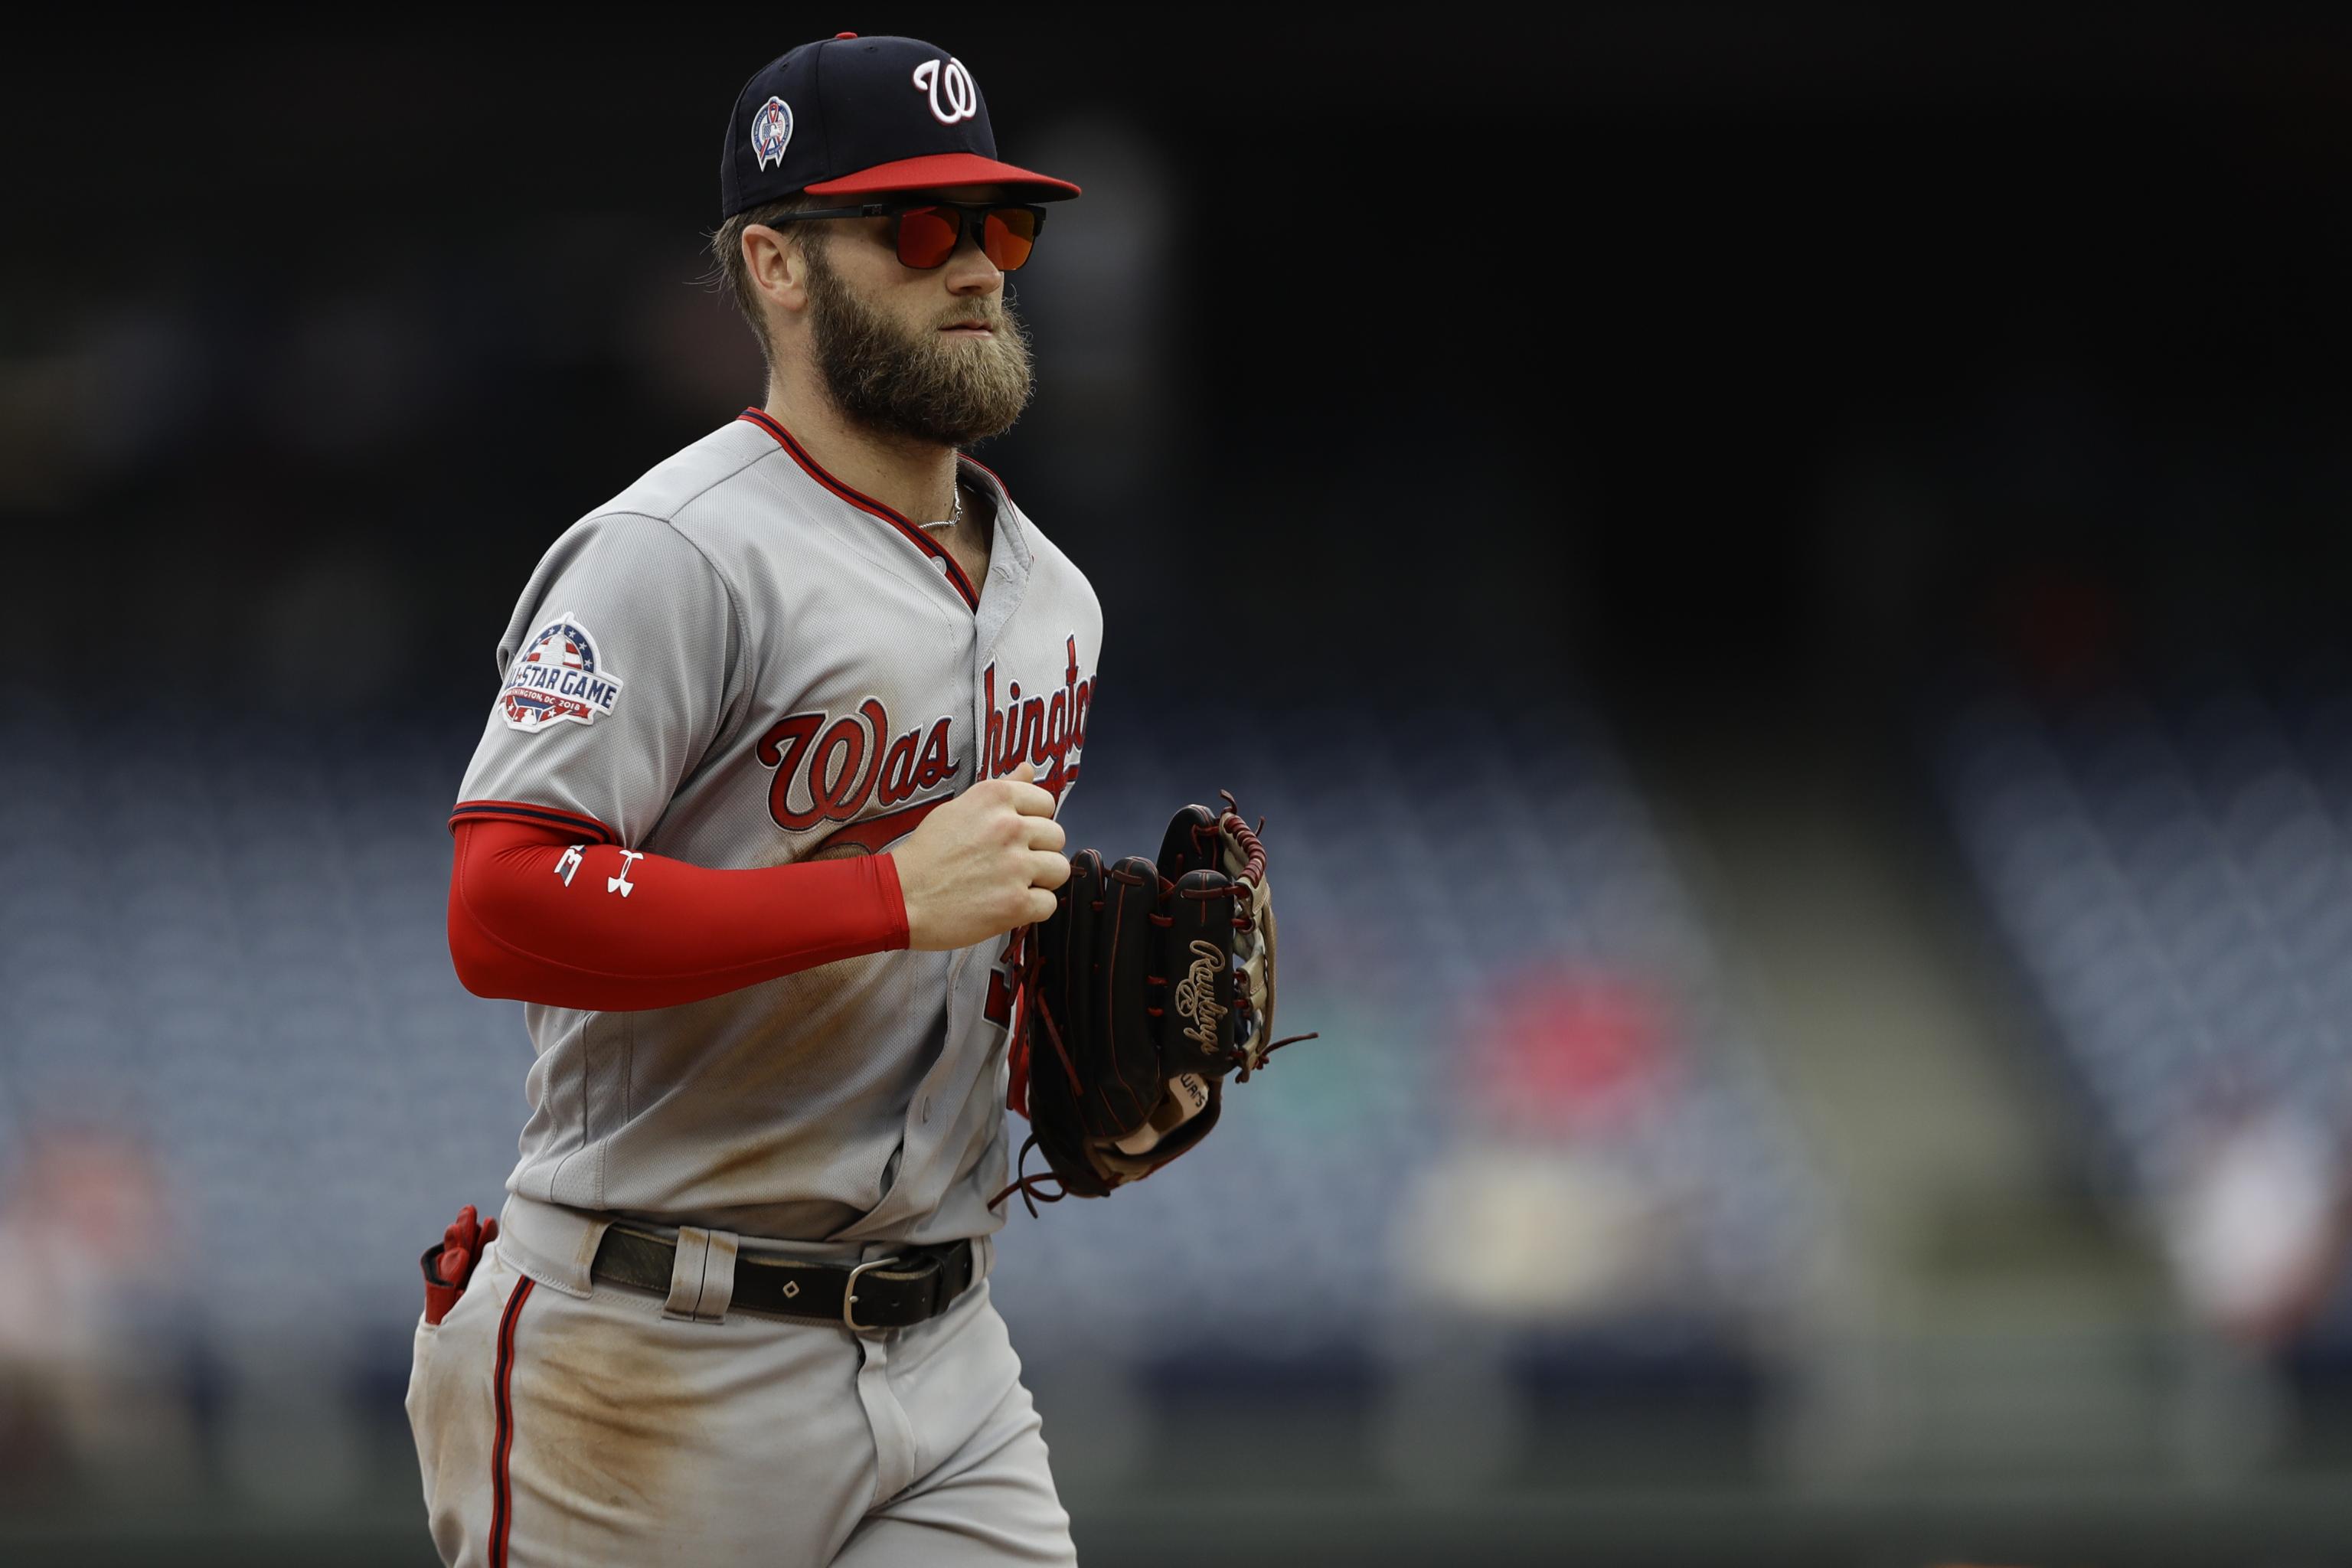 CBS Sports on X: The Washington Nationals had four players